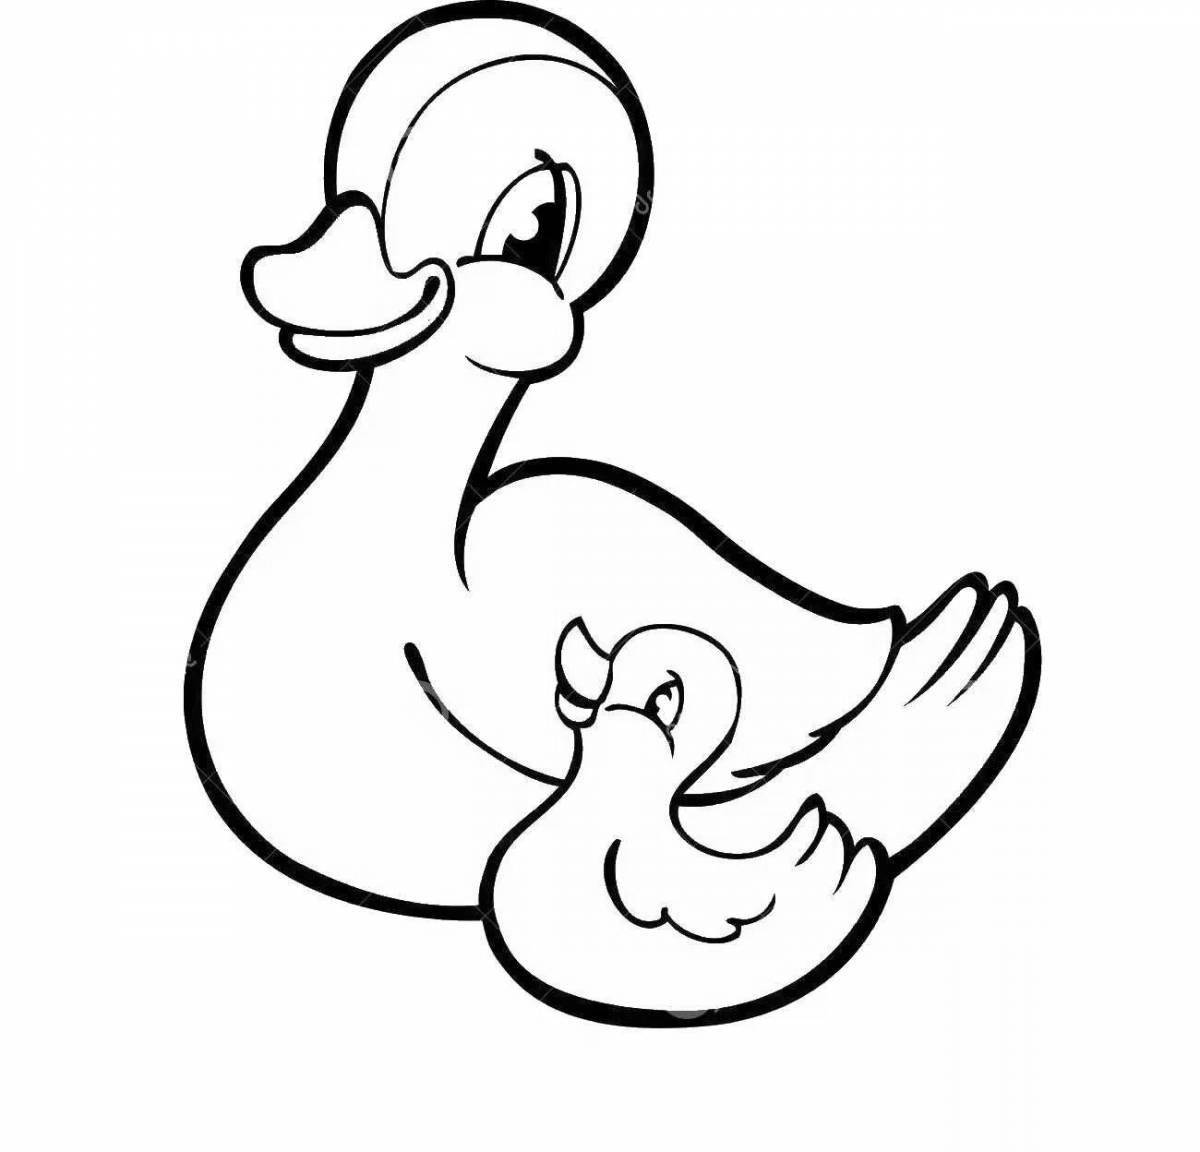 Colorful playful lolofan duck coloring book